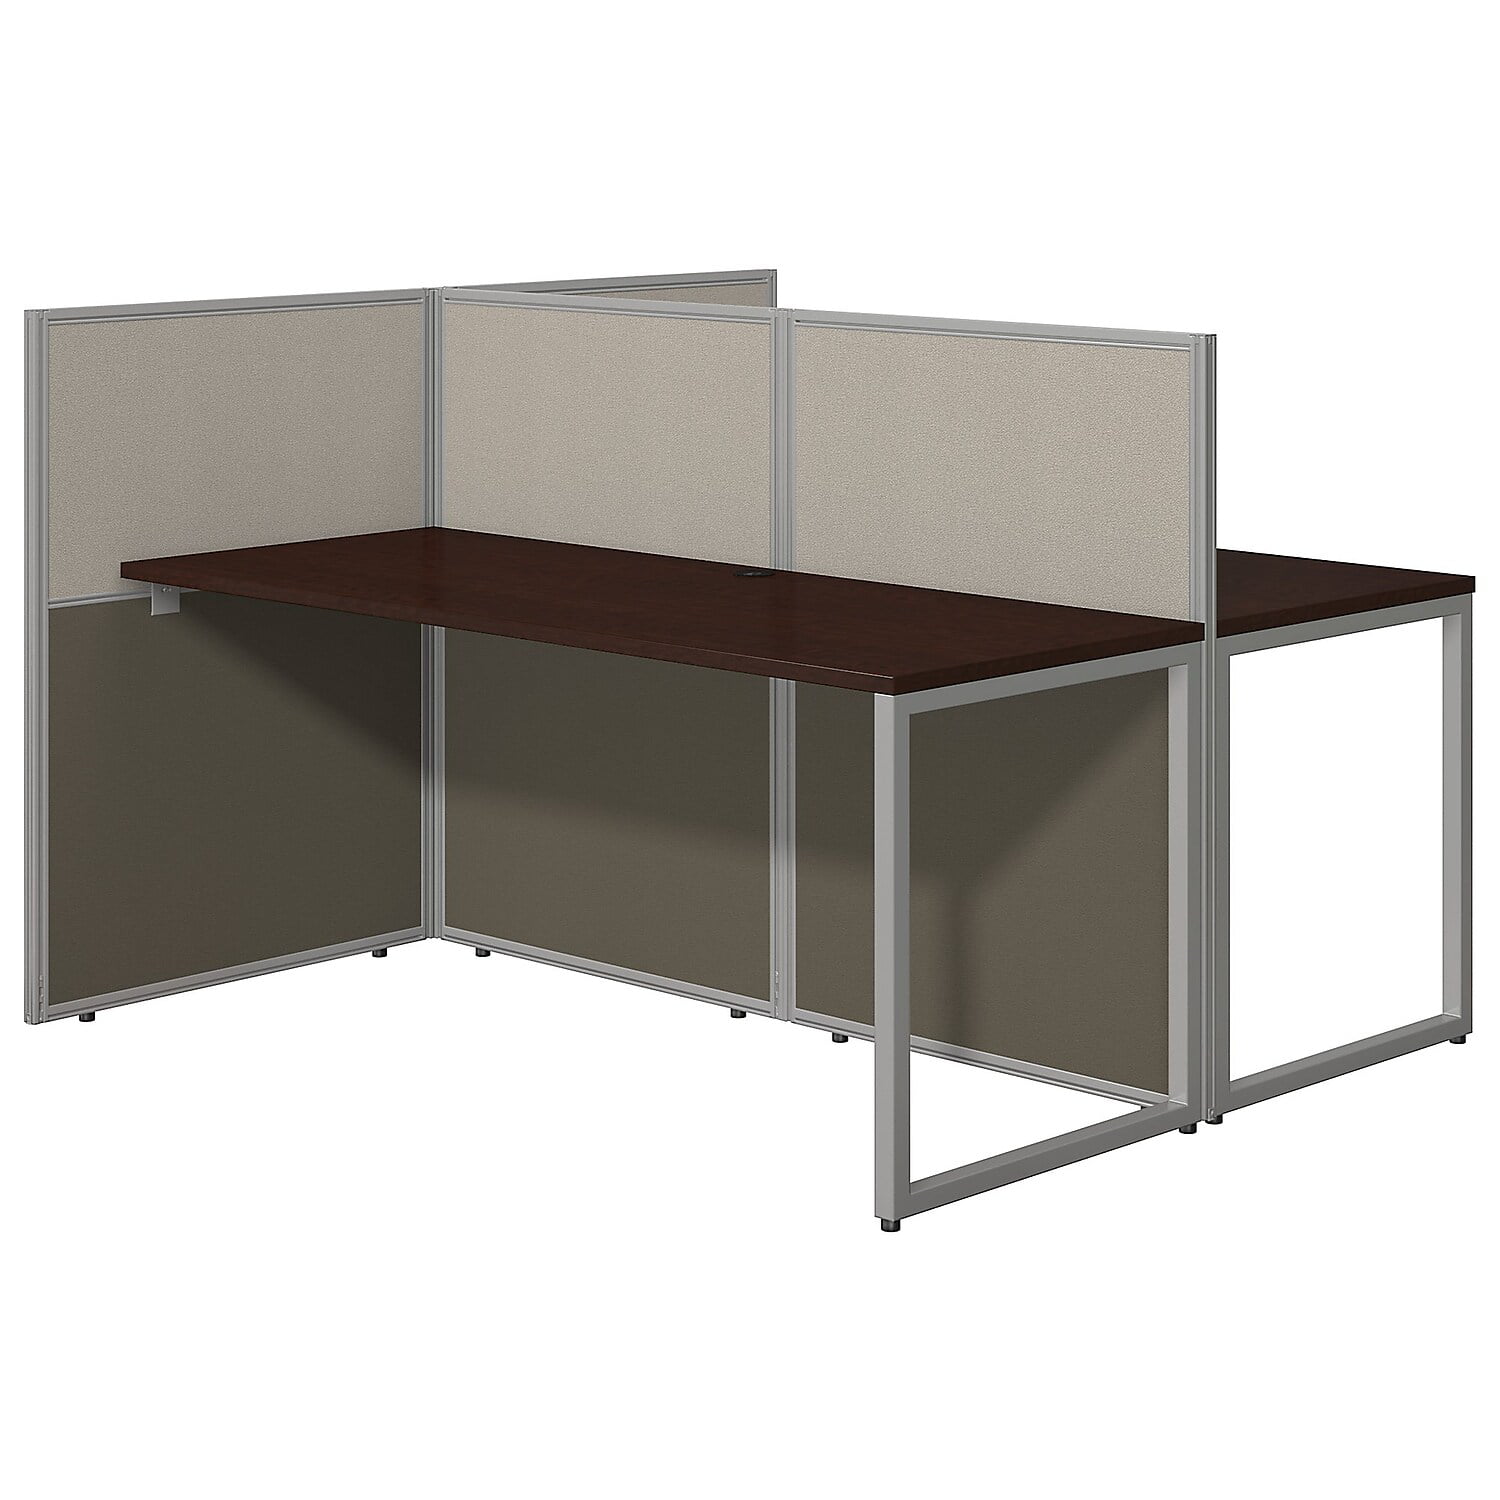 Picture of Bush Business Furniture EOD460MR-03K 60 in. Easy Office Two Person Straight Open Office Desk - Mocha Cherry